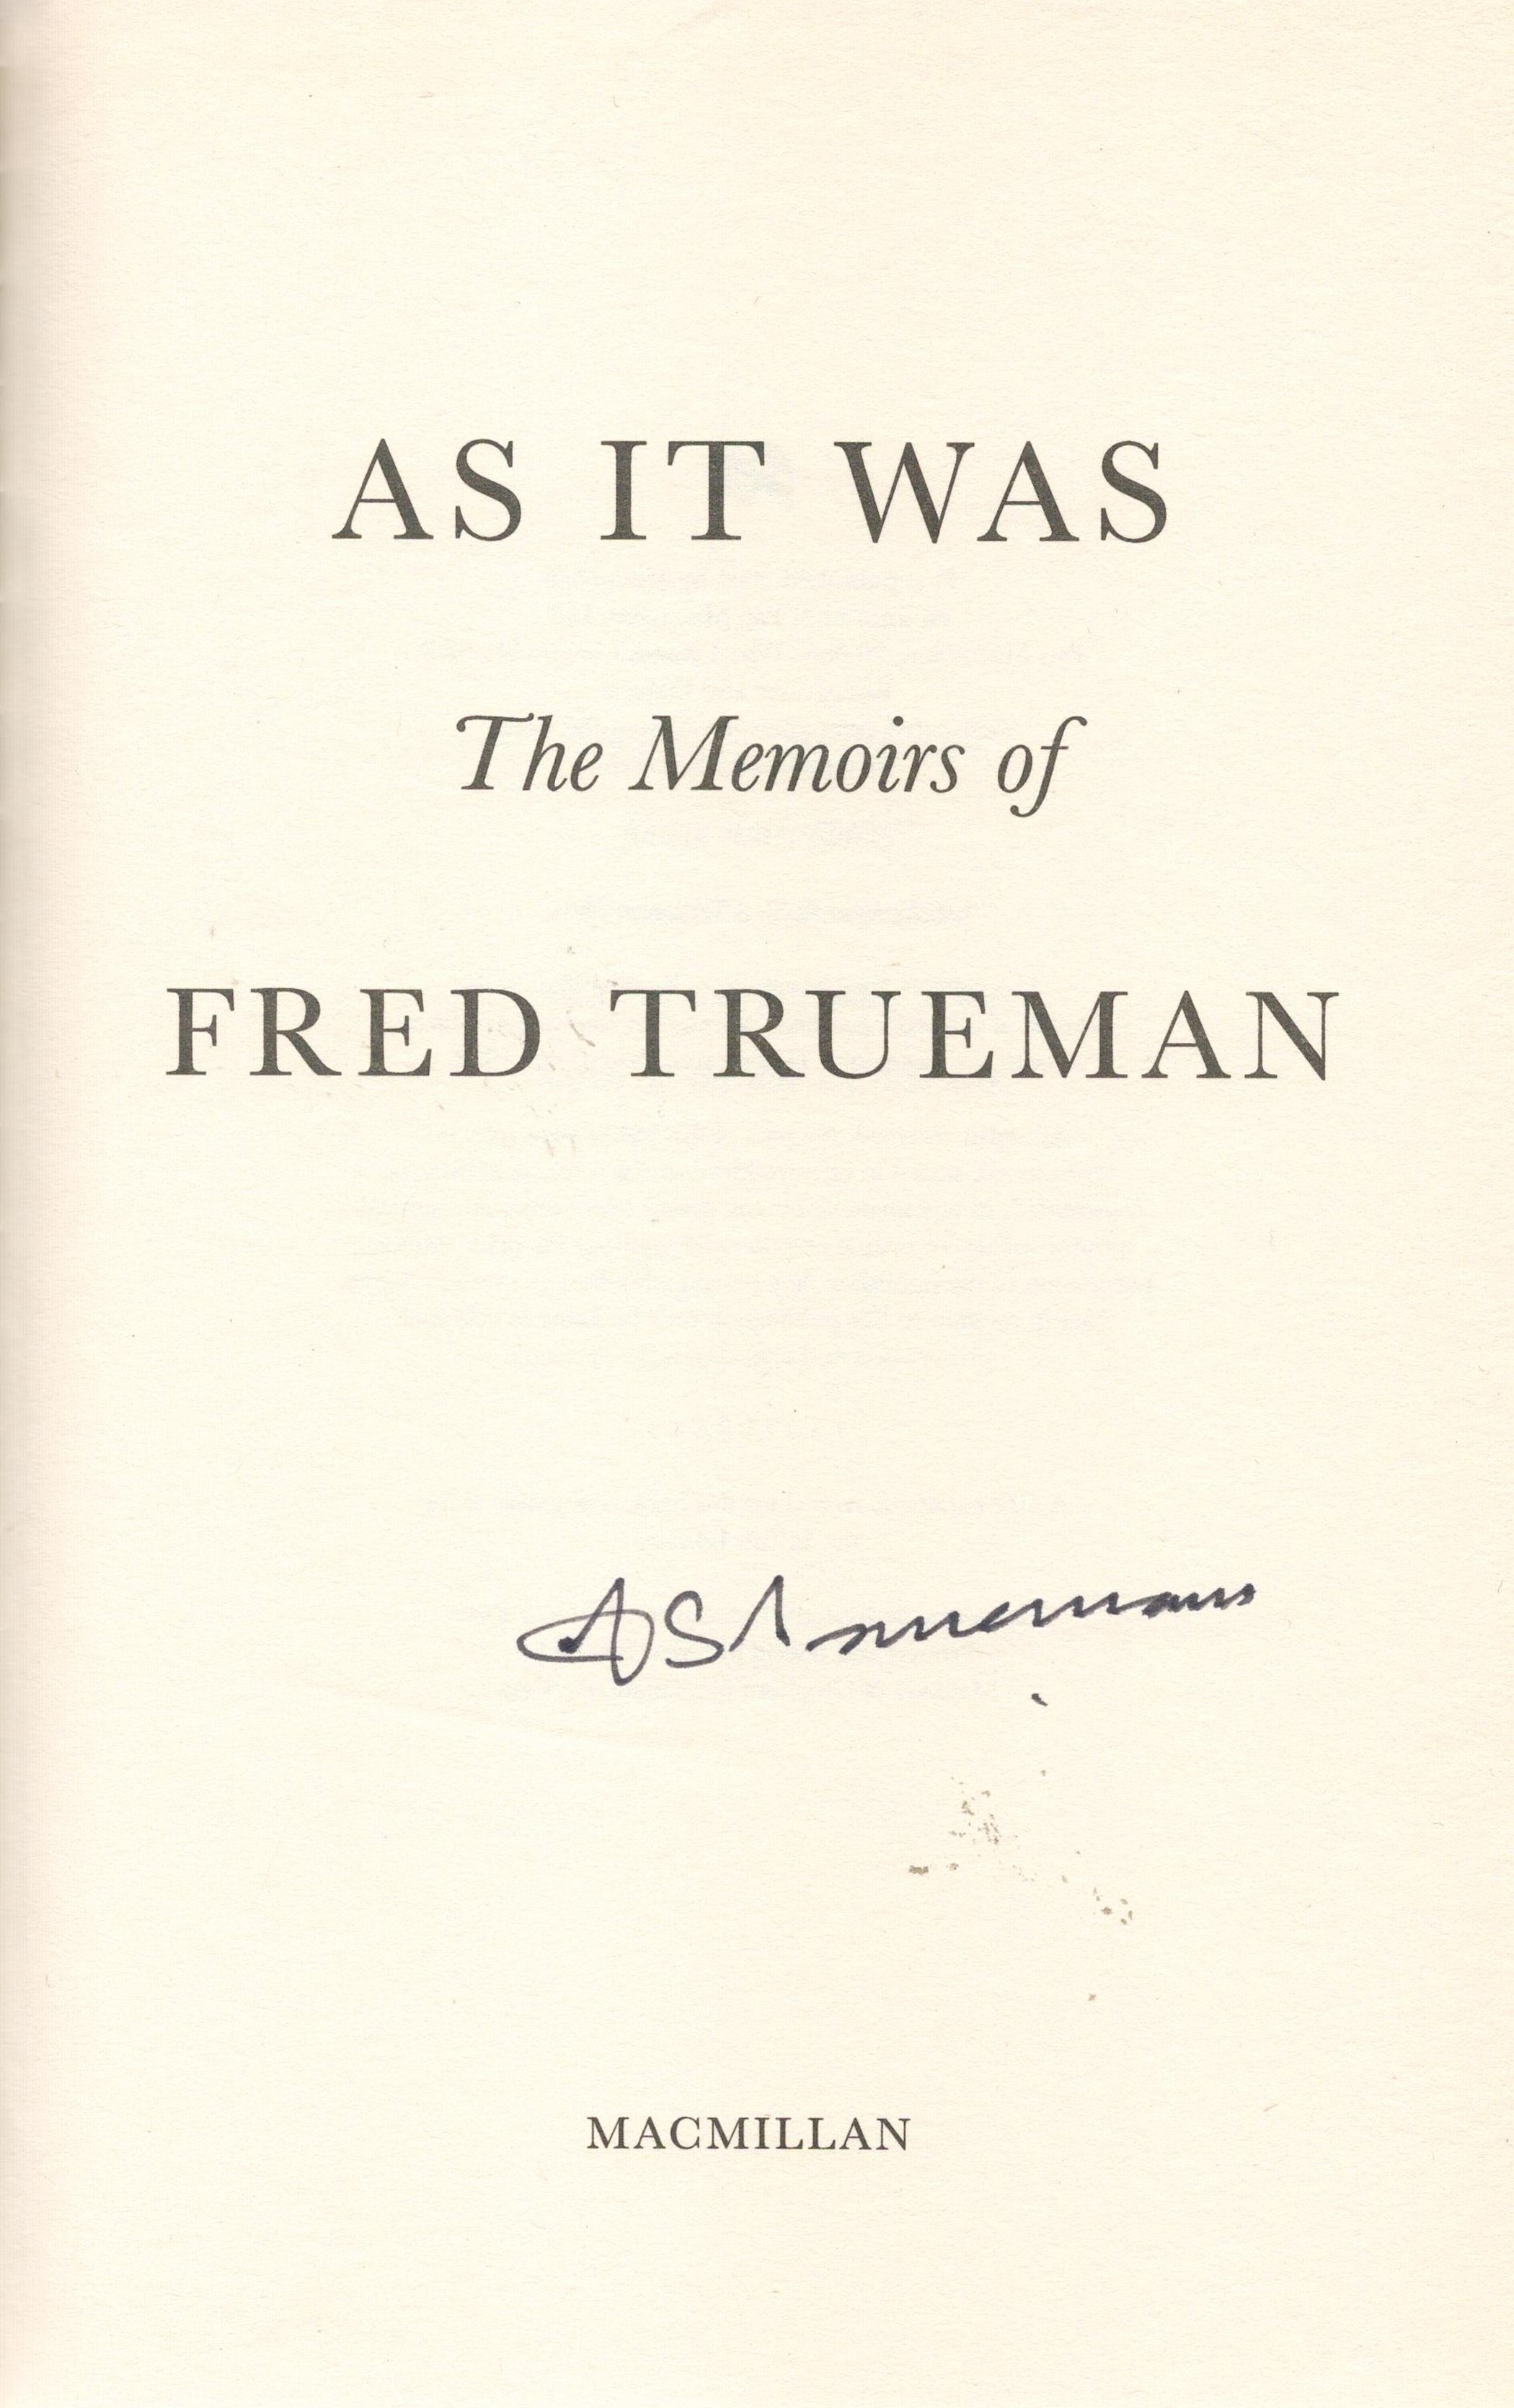 Signed Book Fred Trueman As it was The Memoirs of Fred Trueman First Edition 2004 Hardback Book - Image 3 of 4